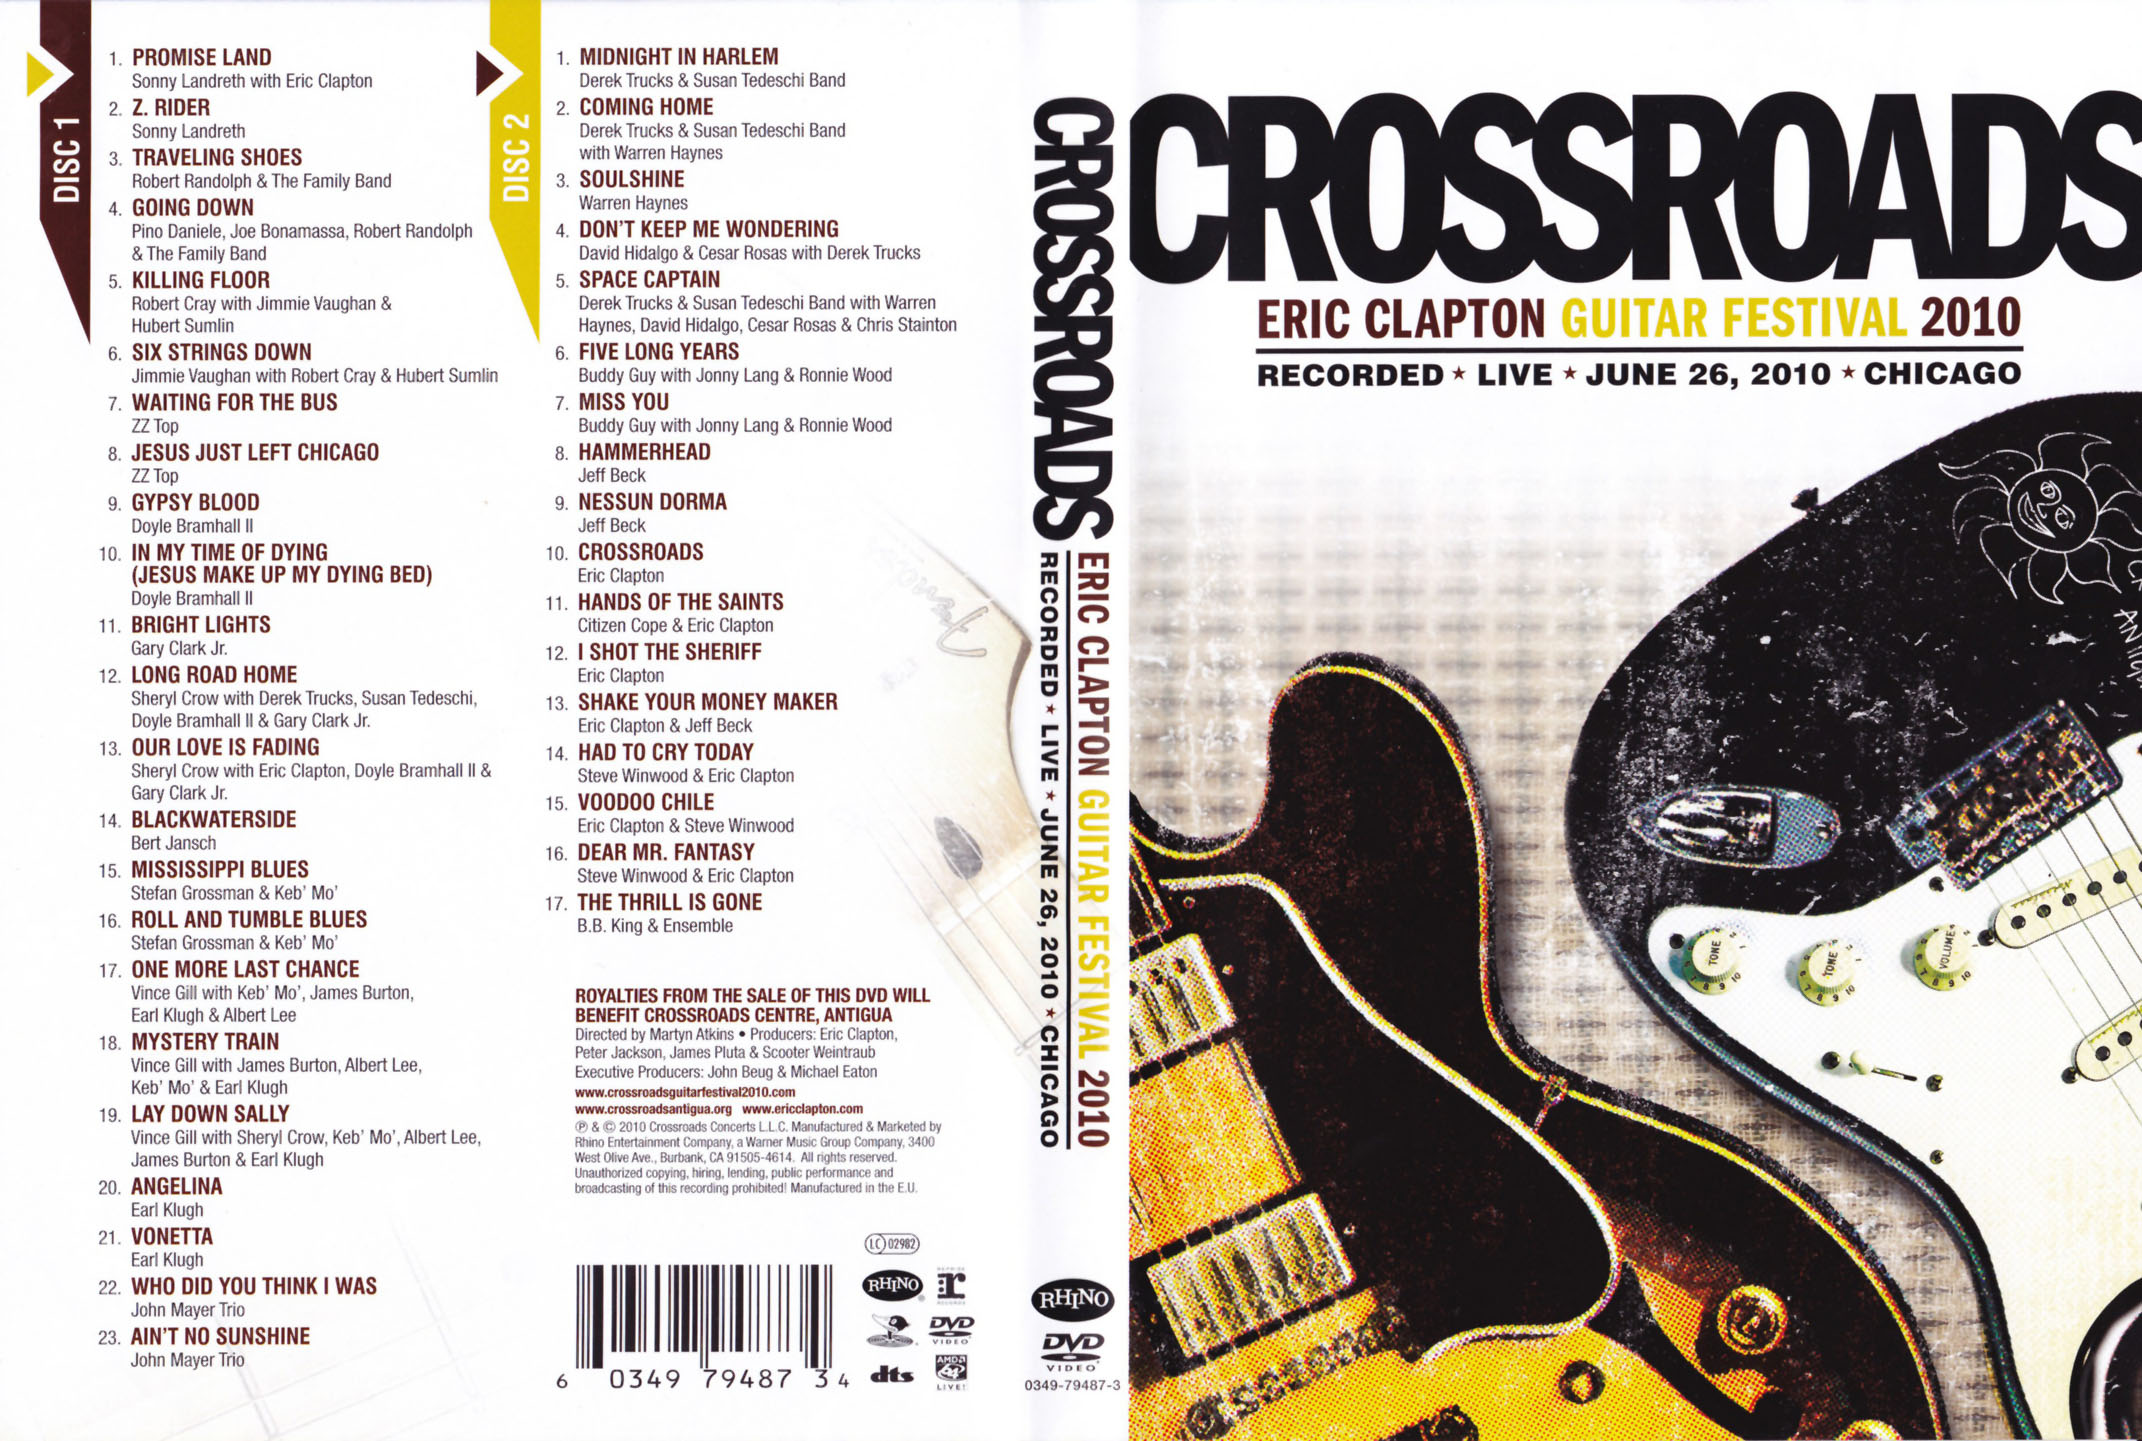 How many Eric Clapton Crossroads dvds are there?